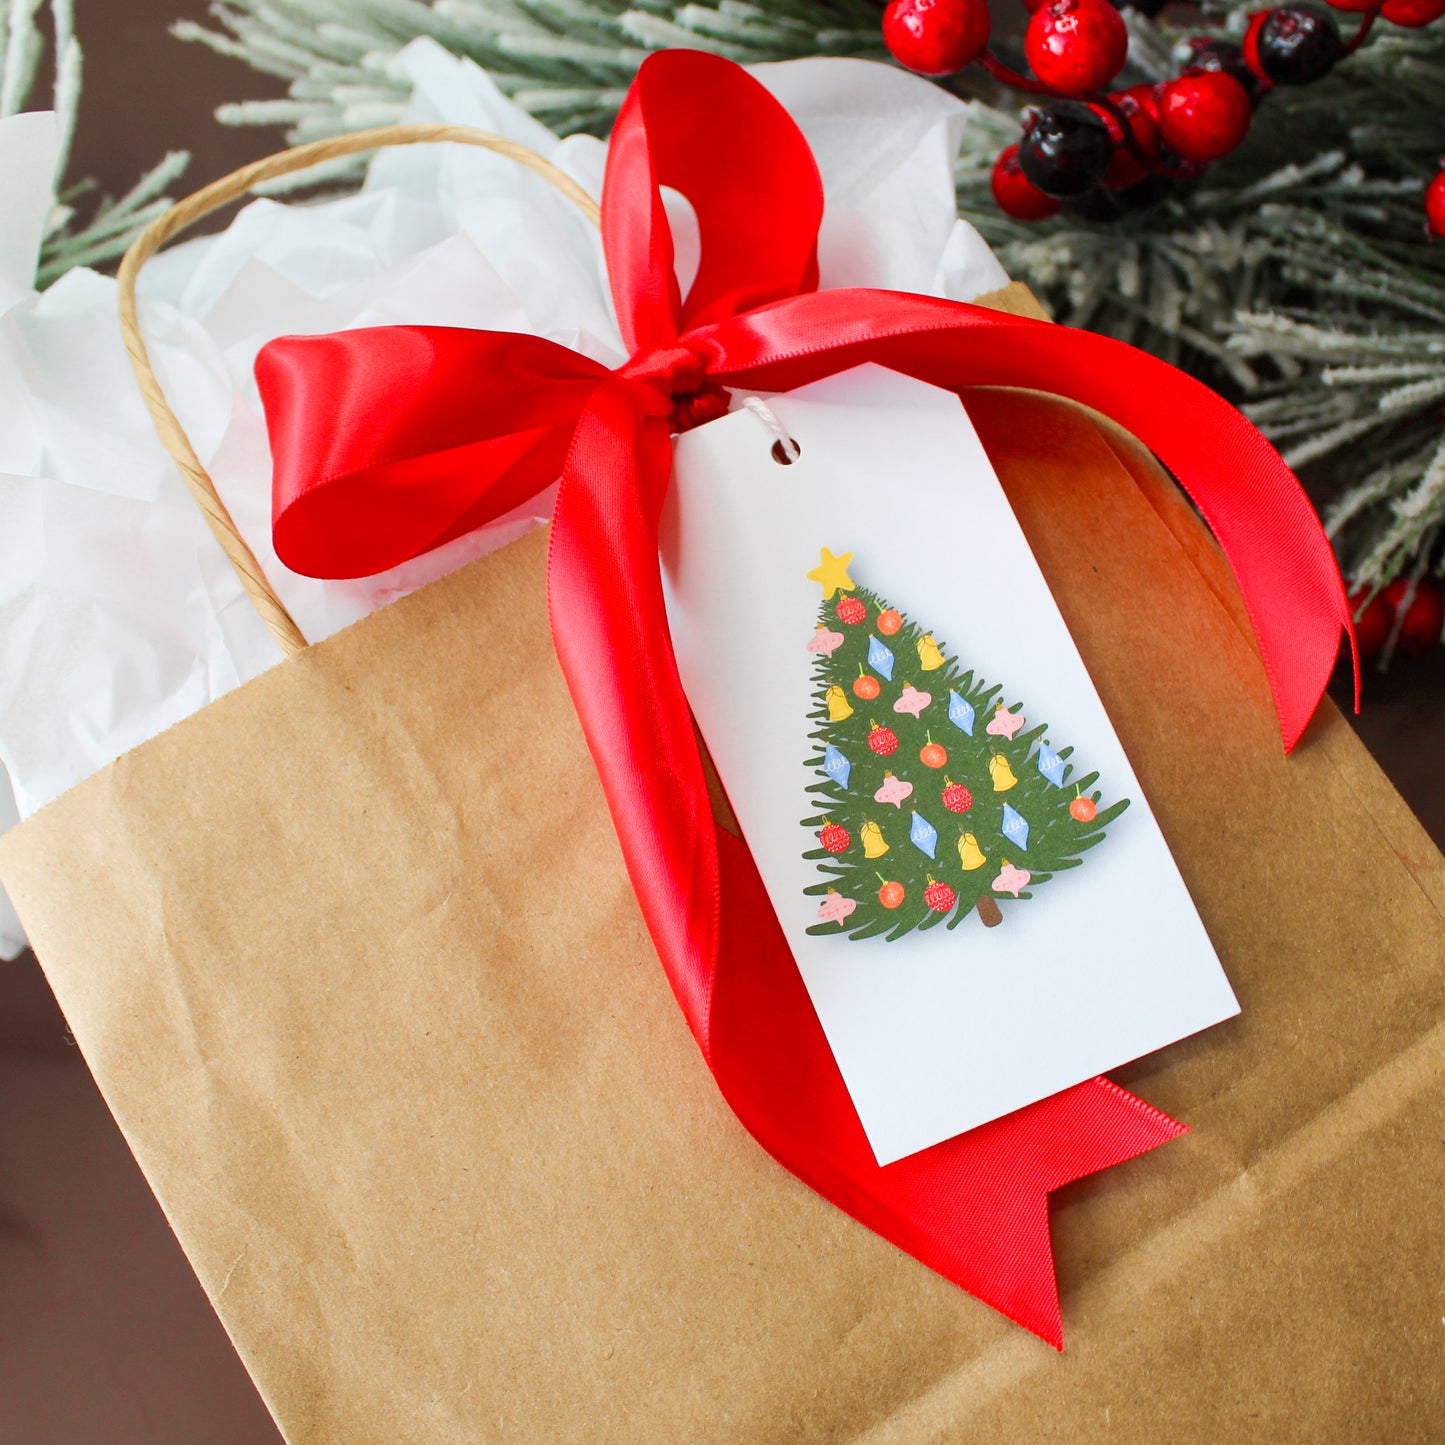 Our Colorful Vintage Ornament Christmas Tree gift tags add a festive touch to your holiday presents. These cute tags come in sets of eight and include pre-cut string. 